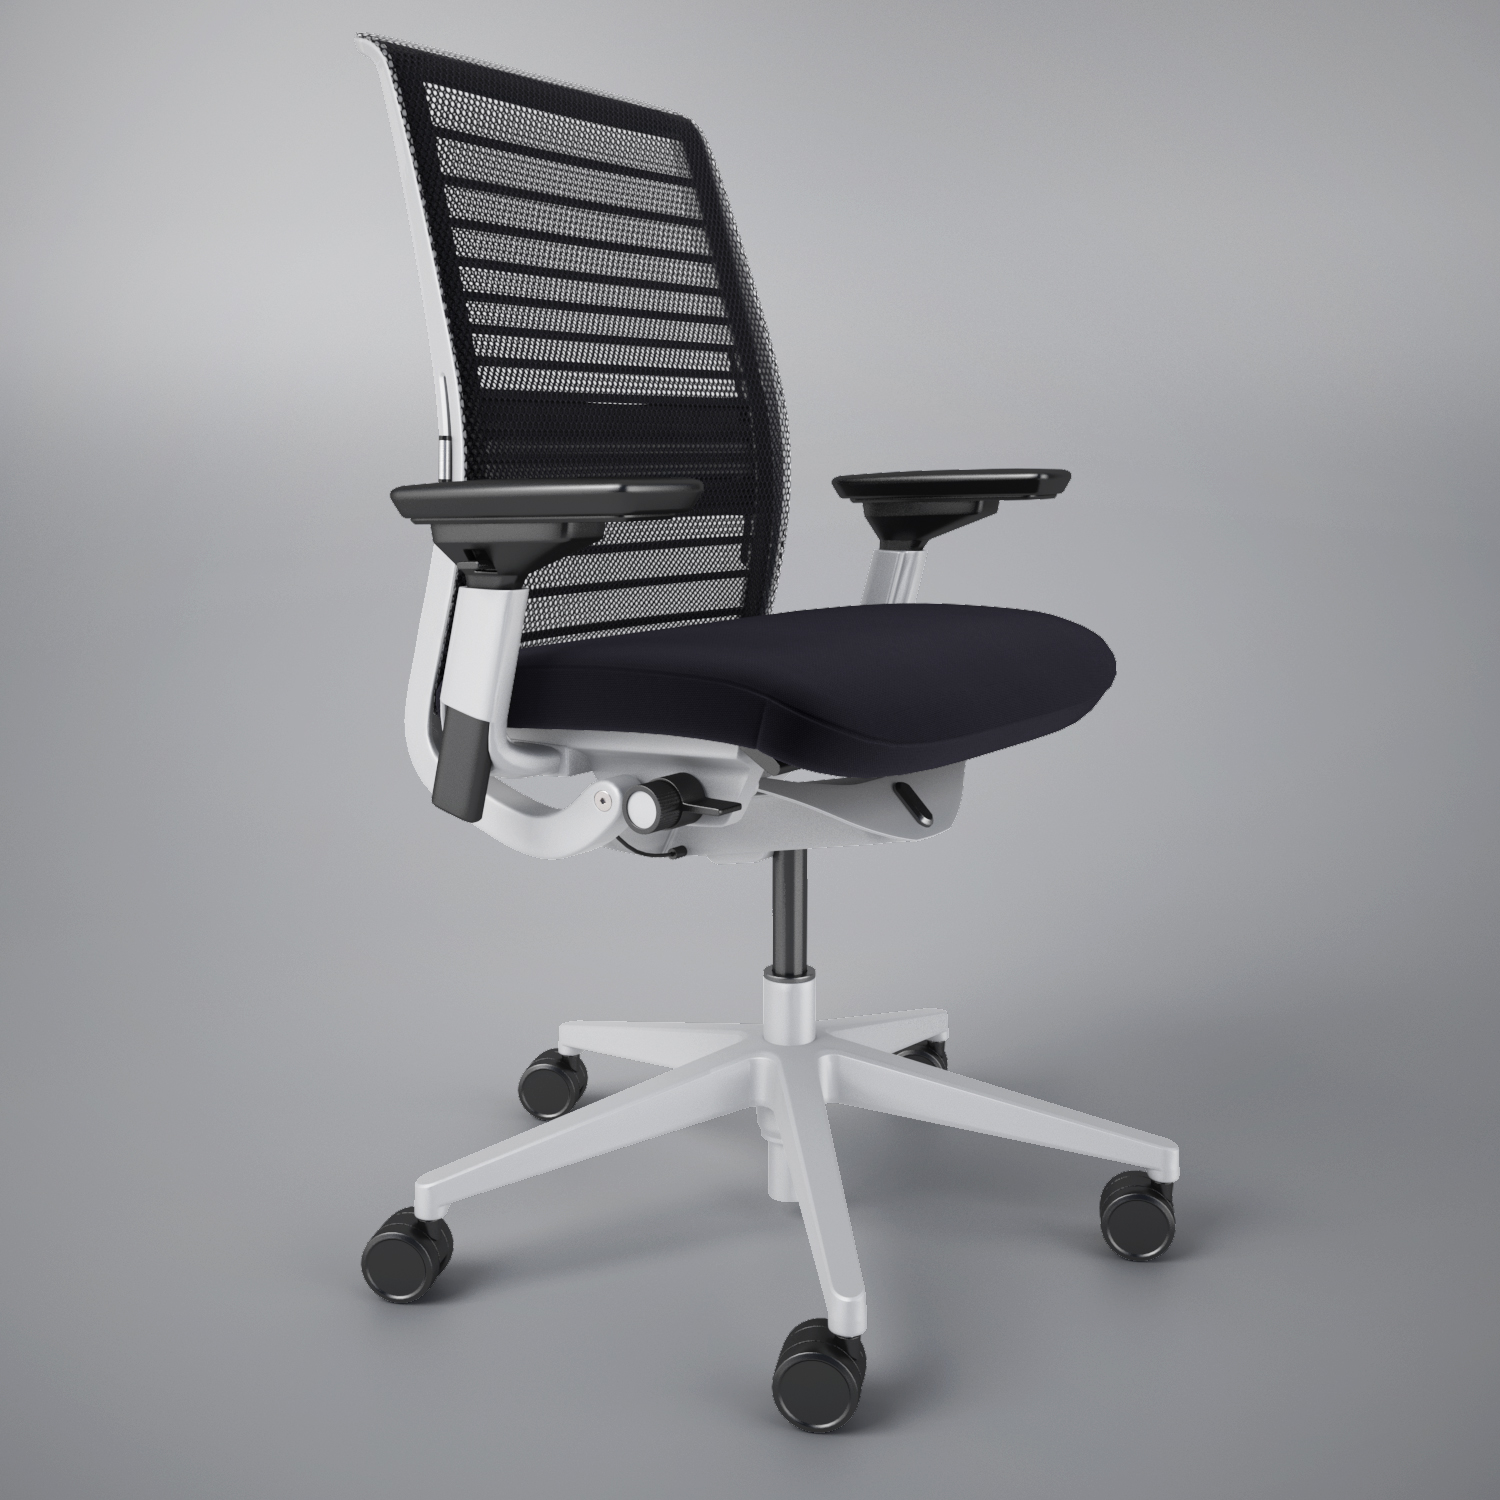 Max Steelcase Think Office Chair